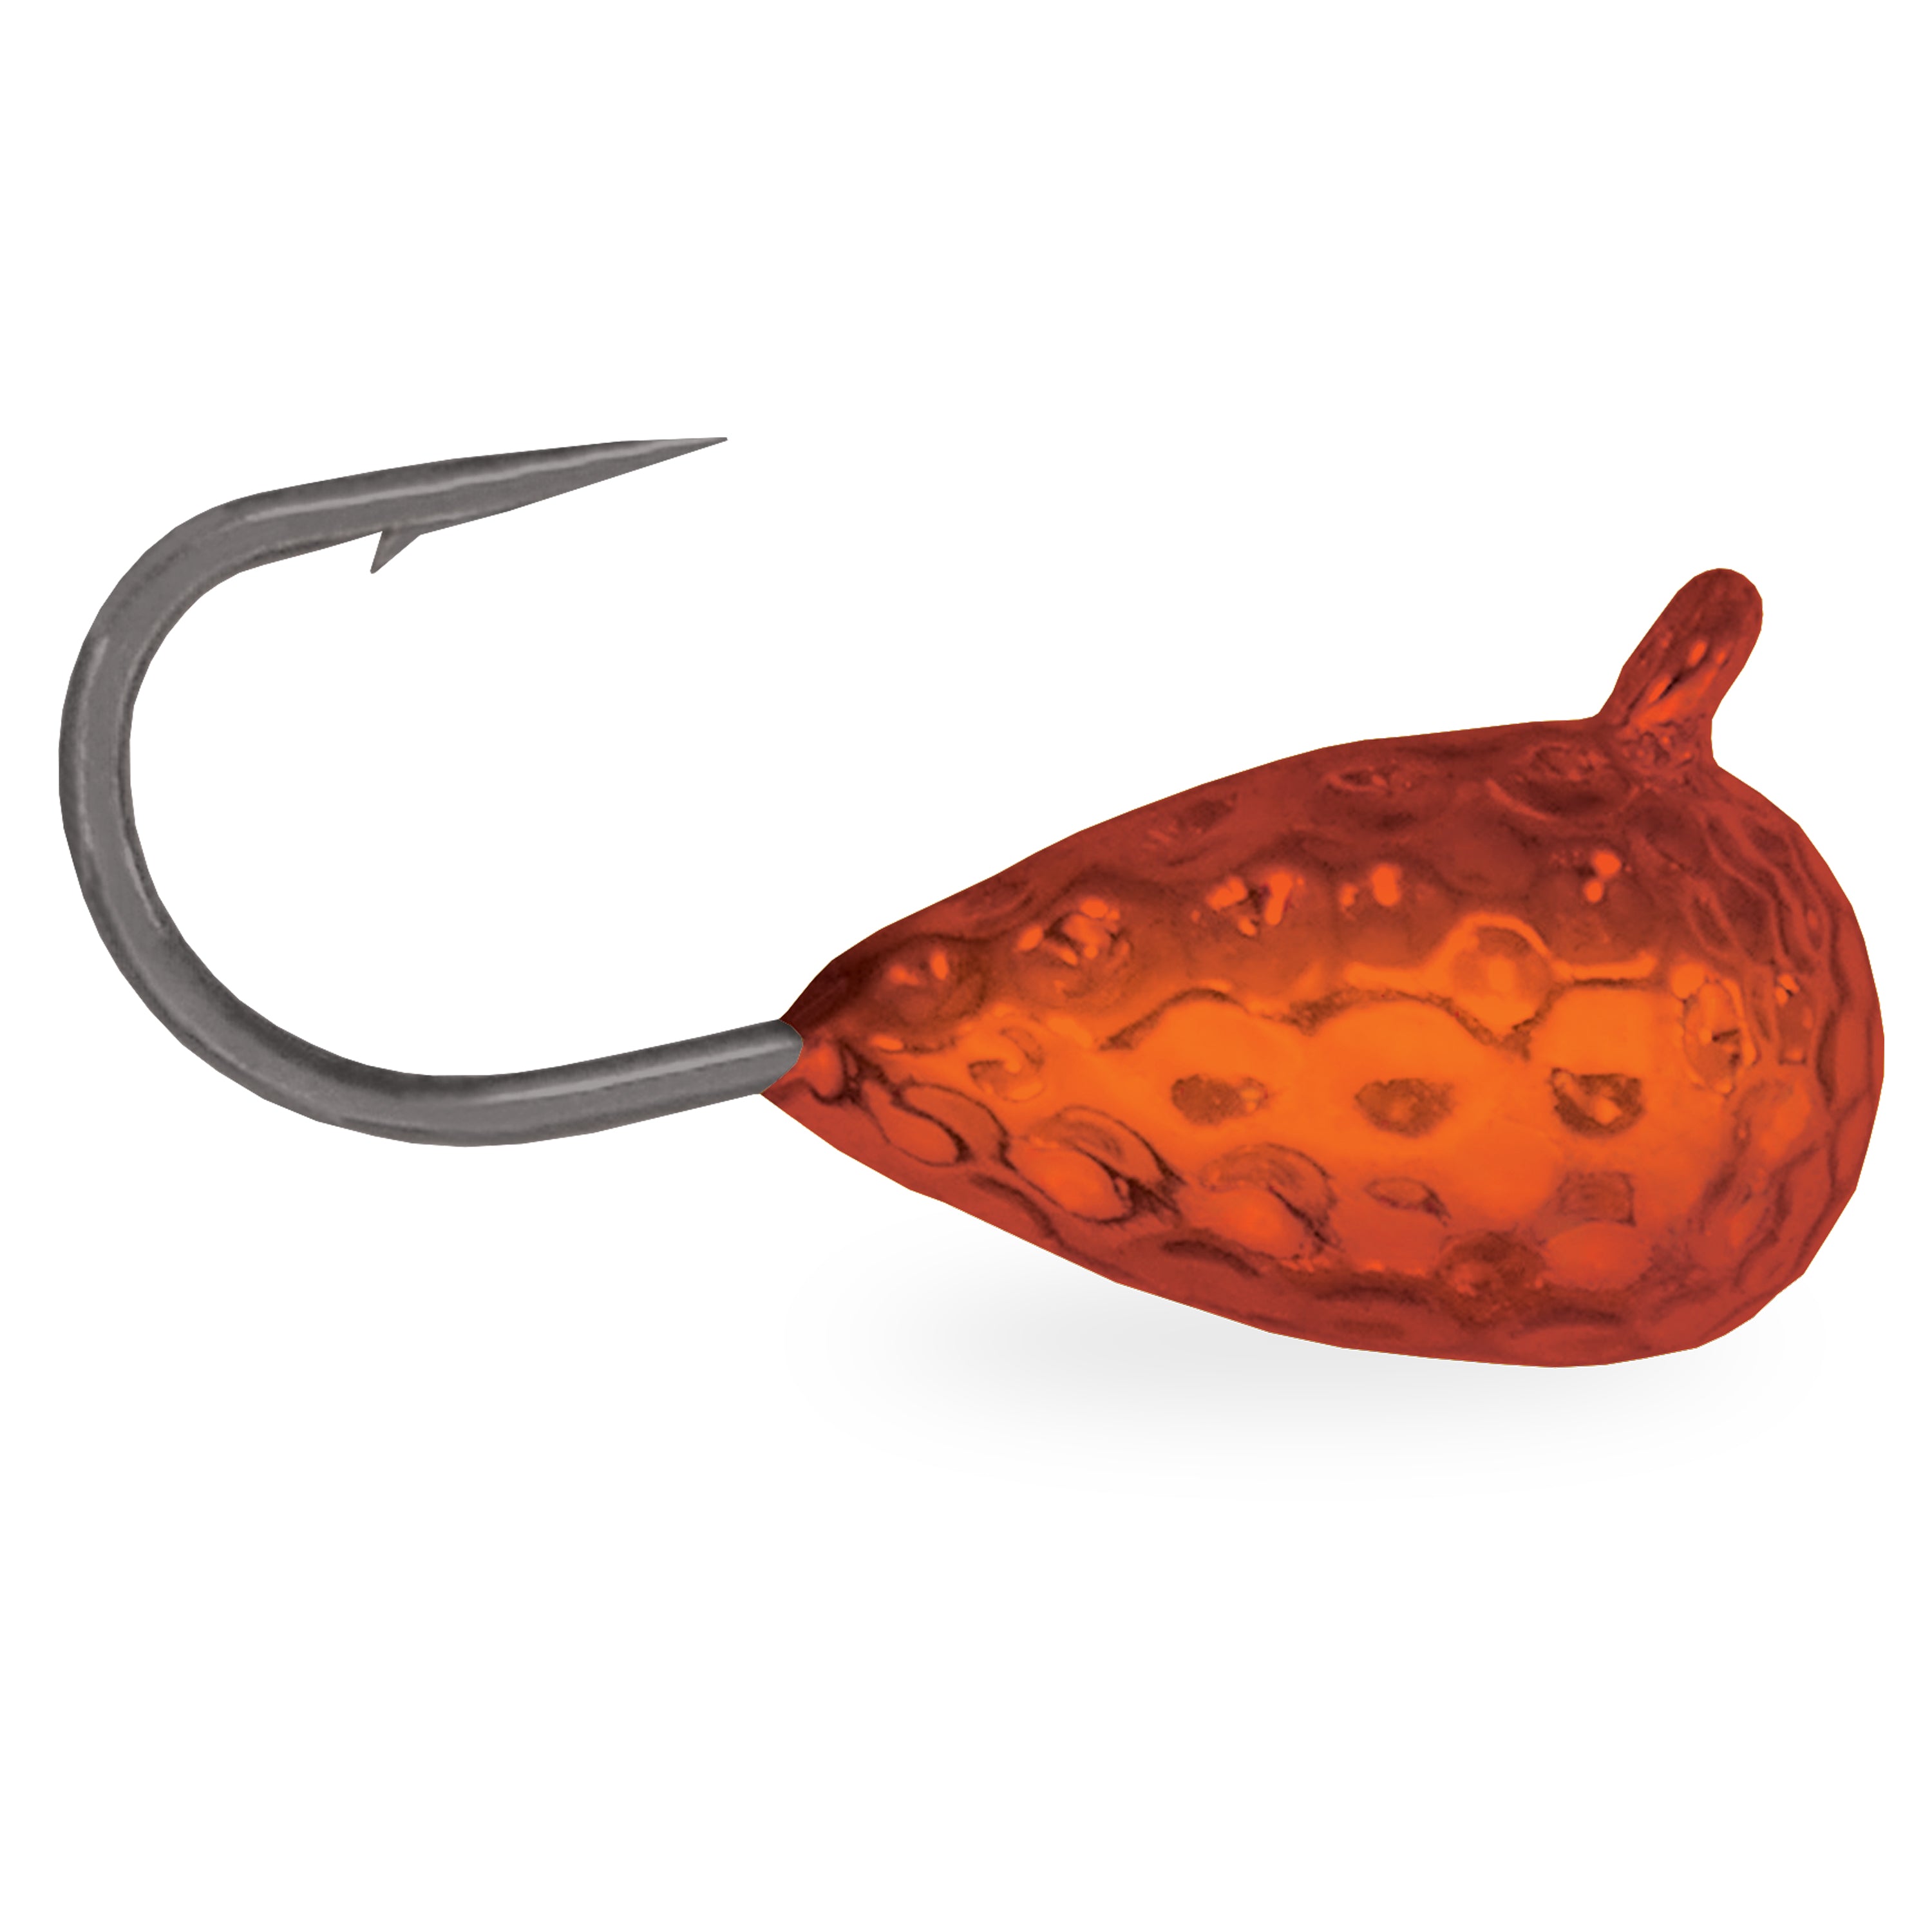 Quality Fishing Lures and Jigs Since 1985